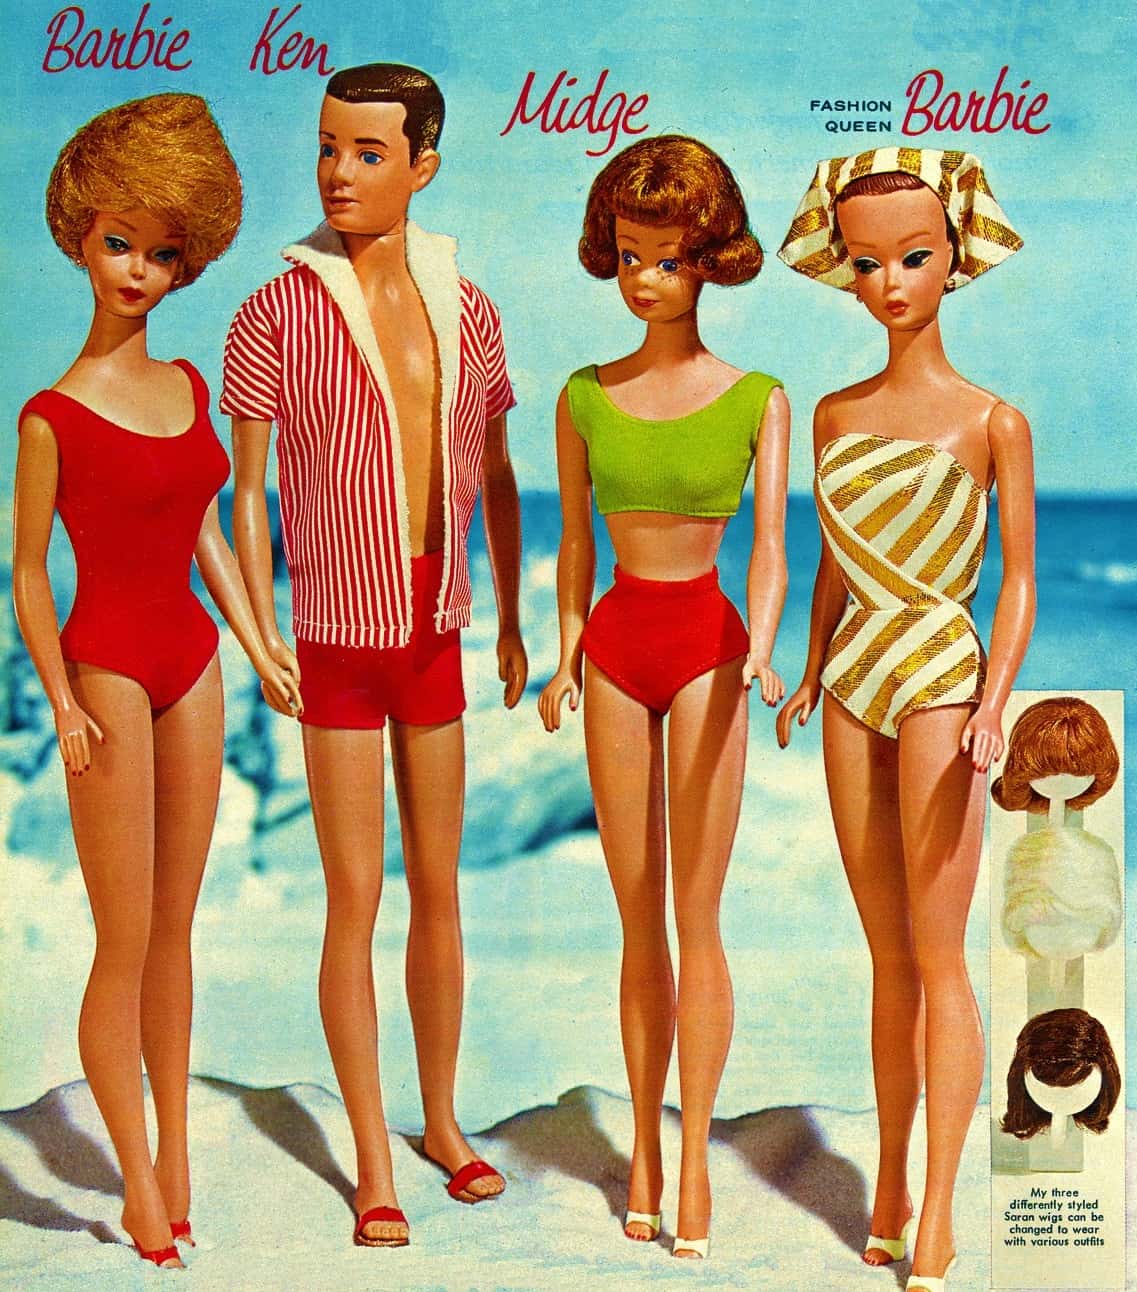 Barbie’s Debut: Analyzing the Shifting Paradigms of Toy Advertising in the 1950s